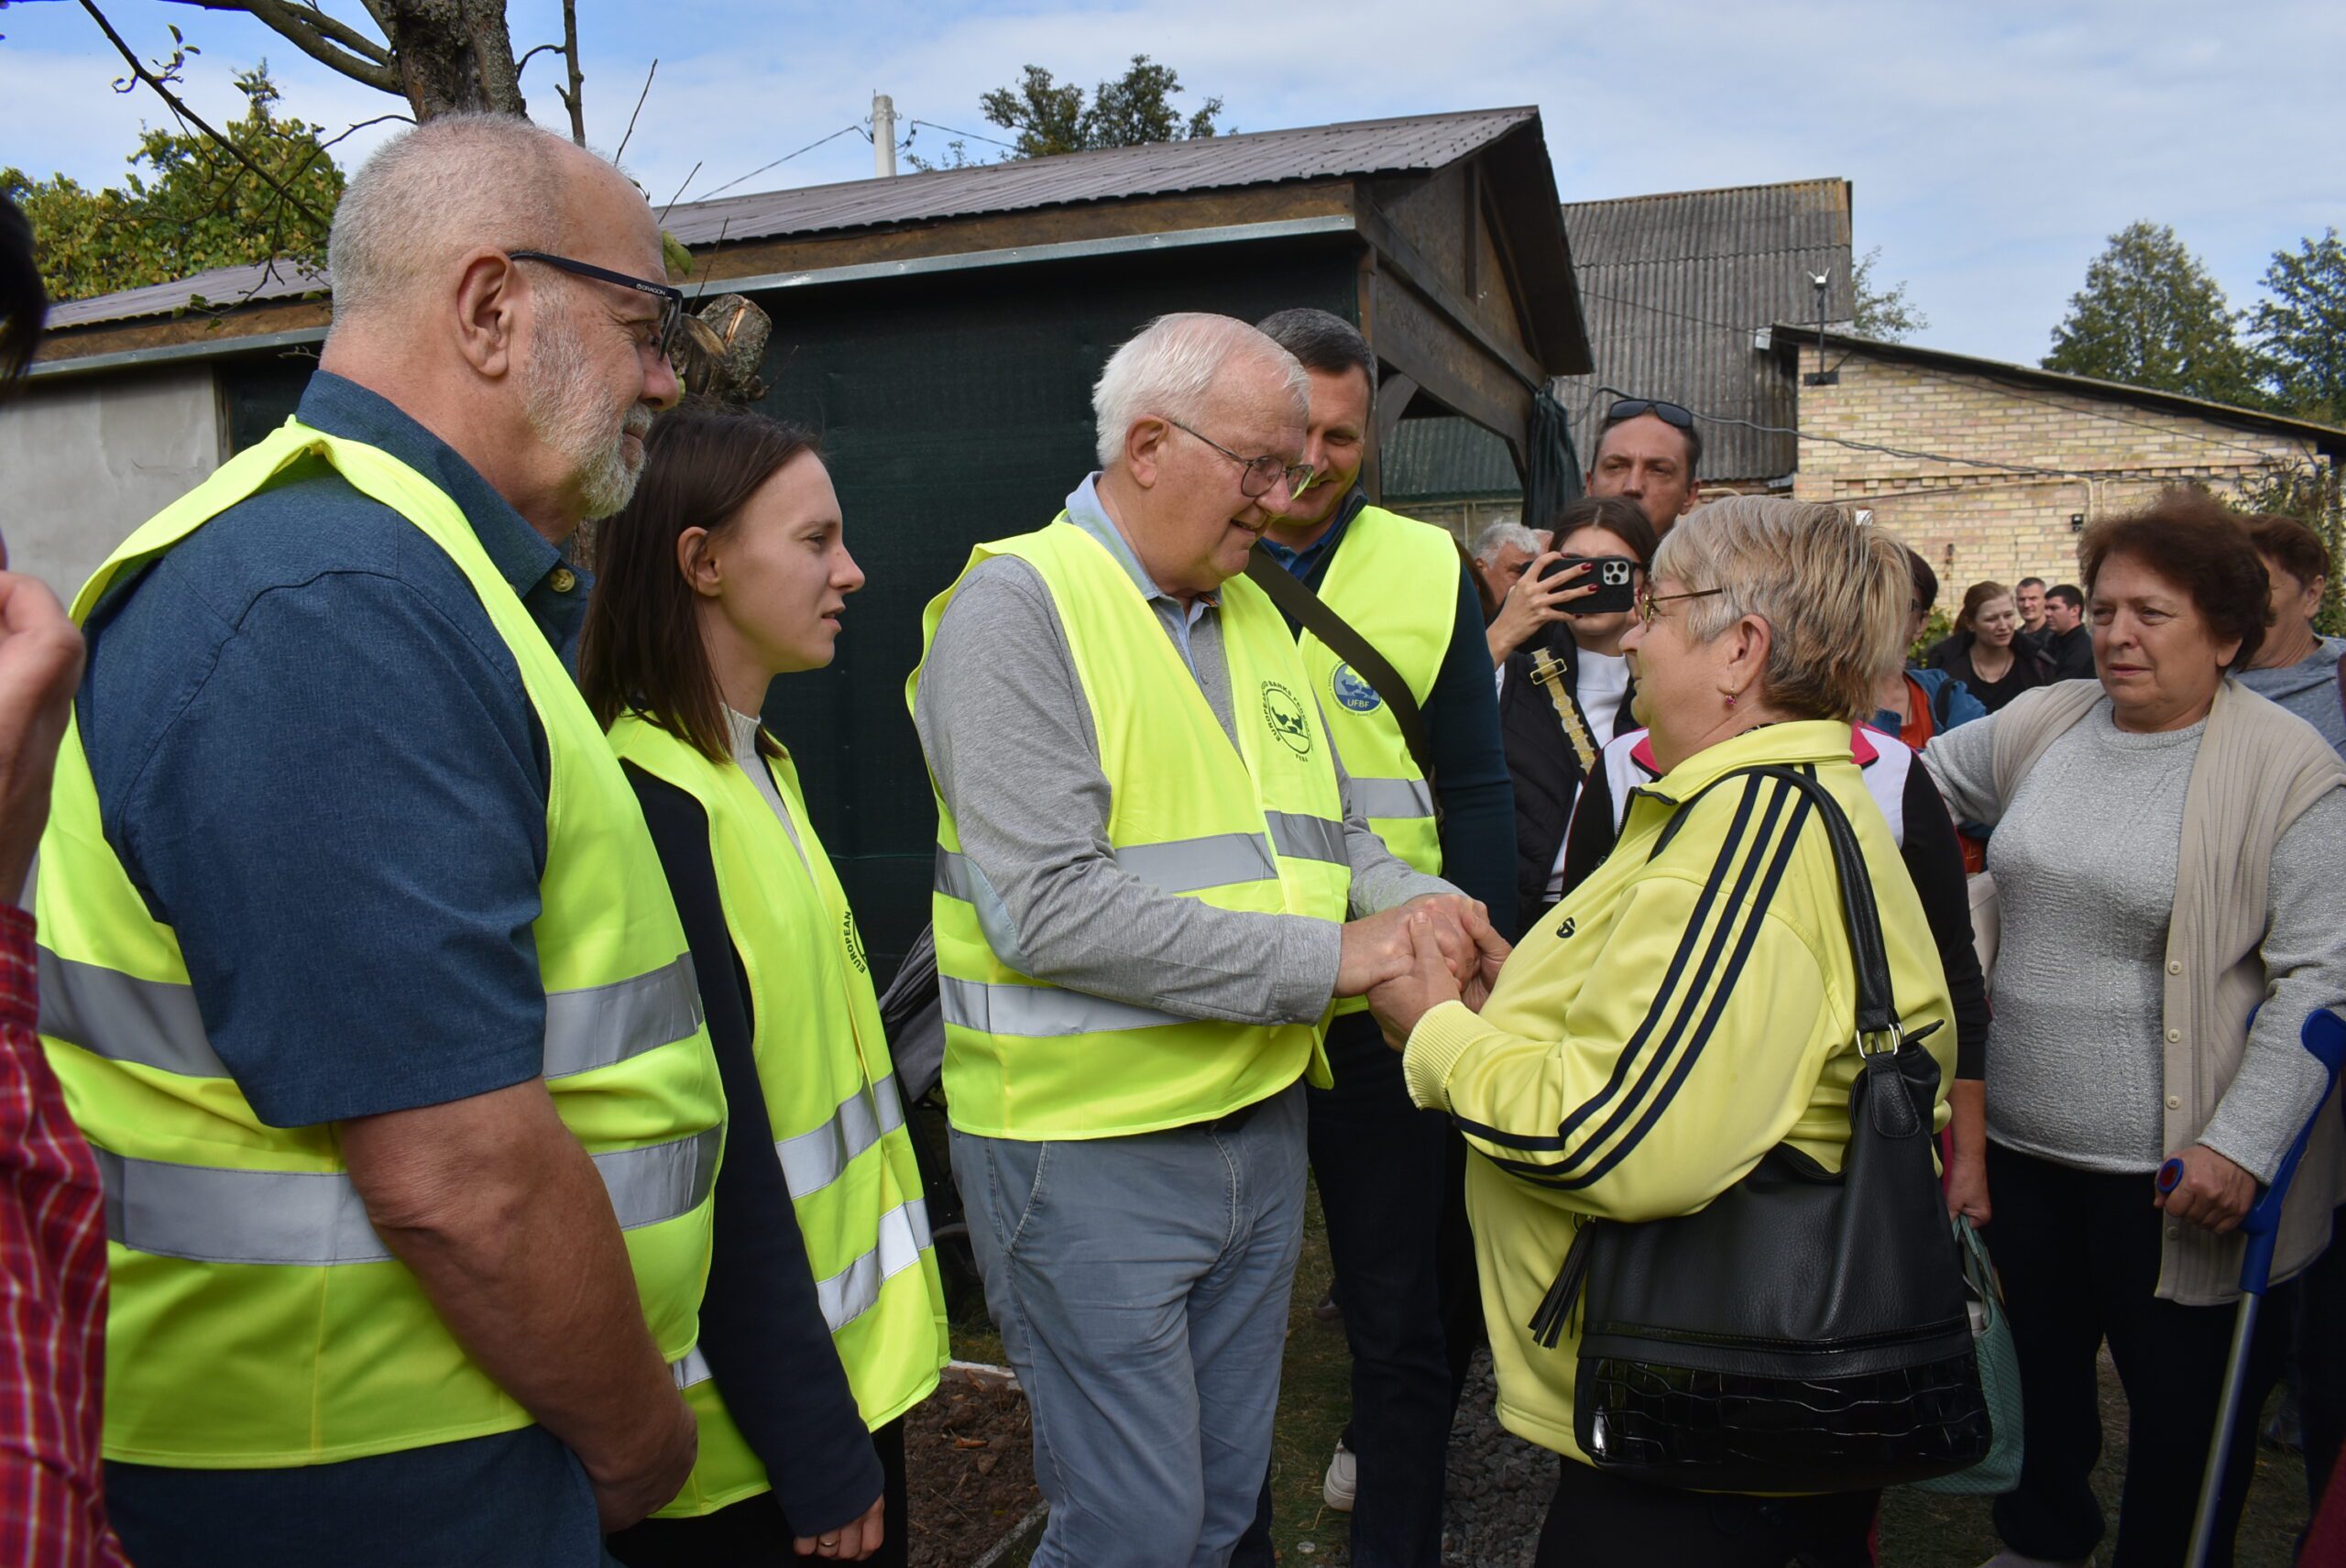 Staff and volunteers from UFBF, FEBA, and GFN visited three villages of Kyiv region — Gorenka, Moshchun, and Mostishche — to deliver essential supplies and speak with community members. (Photo: Ukrainian Food Banks Federation)